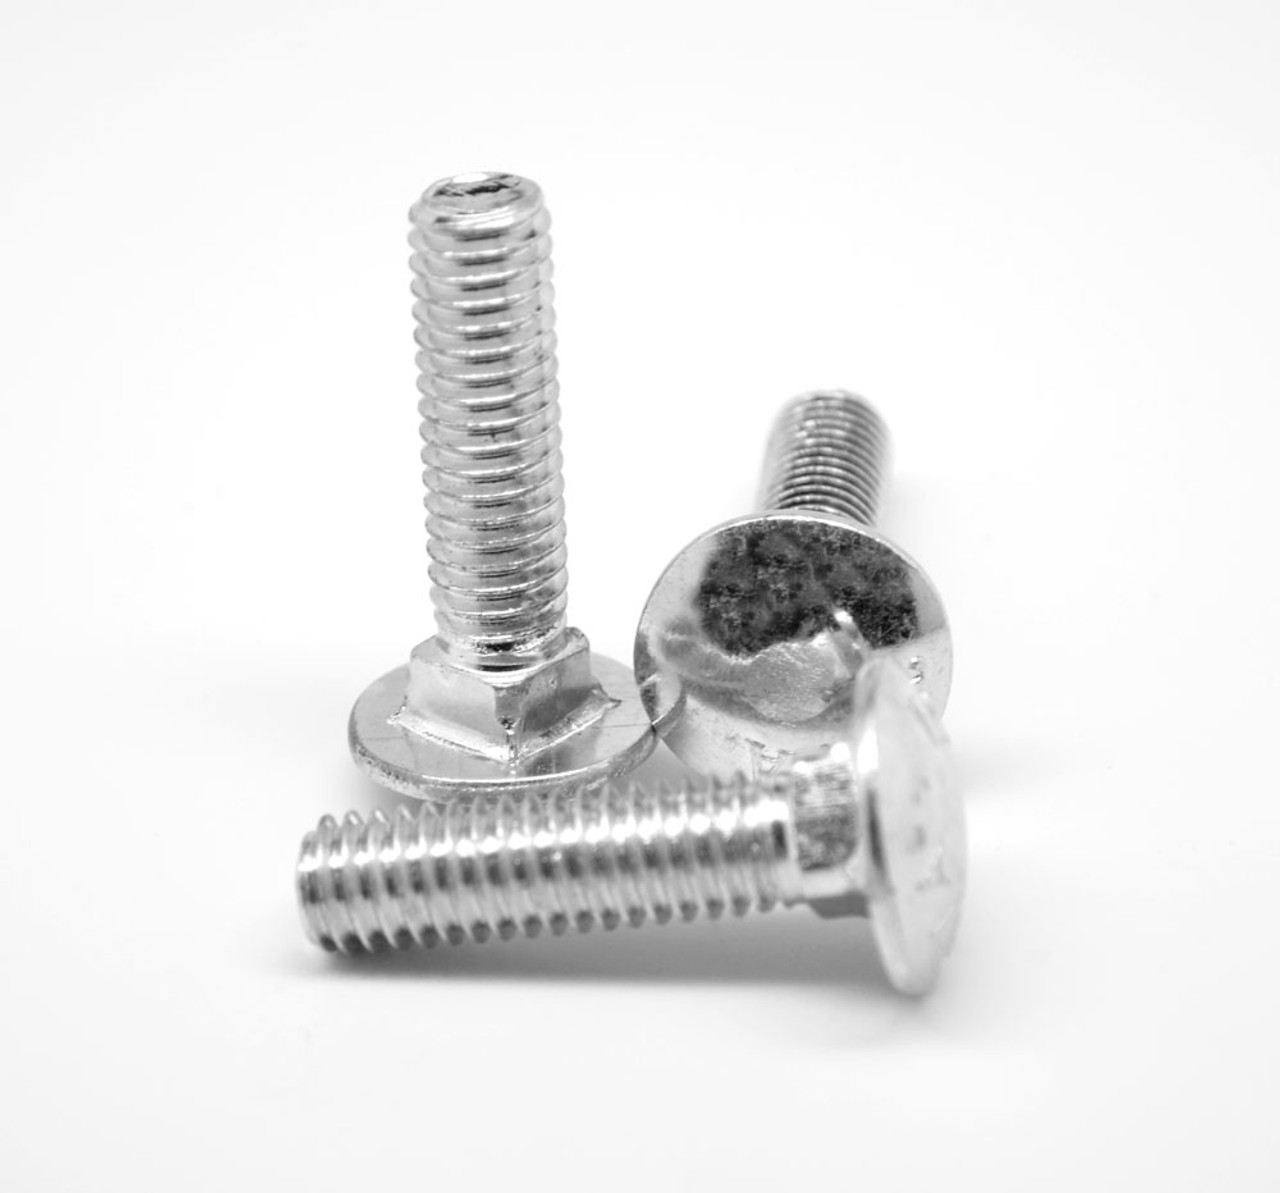 M12 x 1.75 x 35 MM (FT) Coarse Thread DIN 603 Class 4.6 Carriage Bolt Low Carbon Steel Zinc Plated